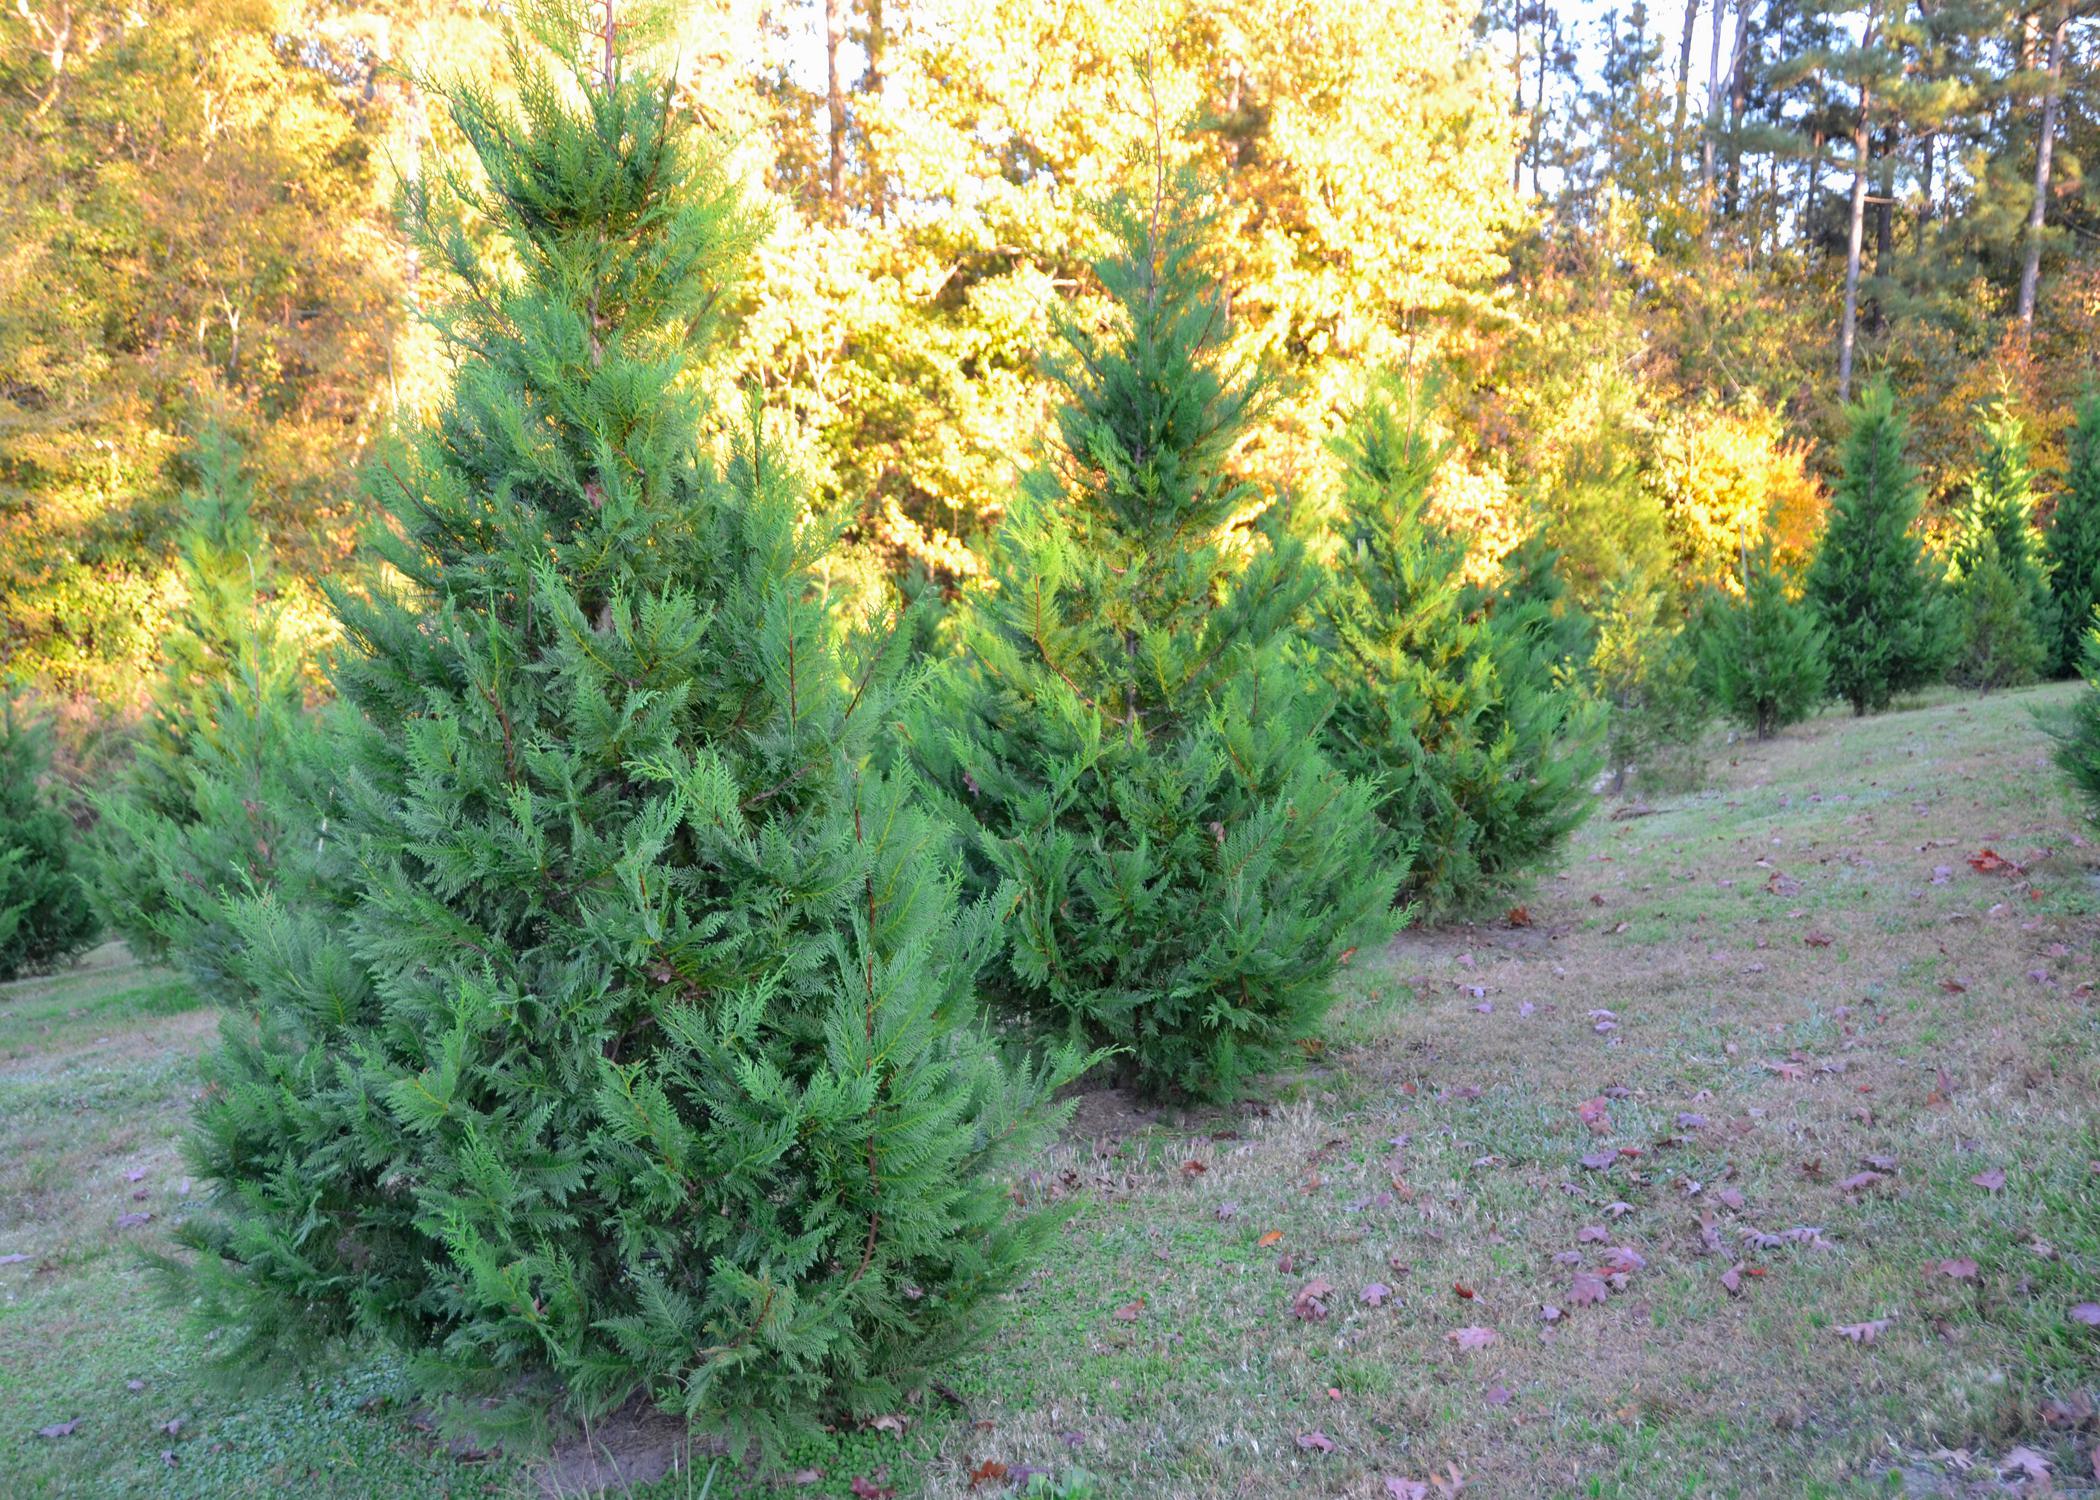 Choose-and-cut Christmas trees in a field